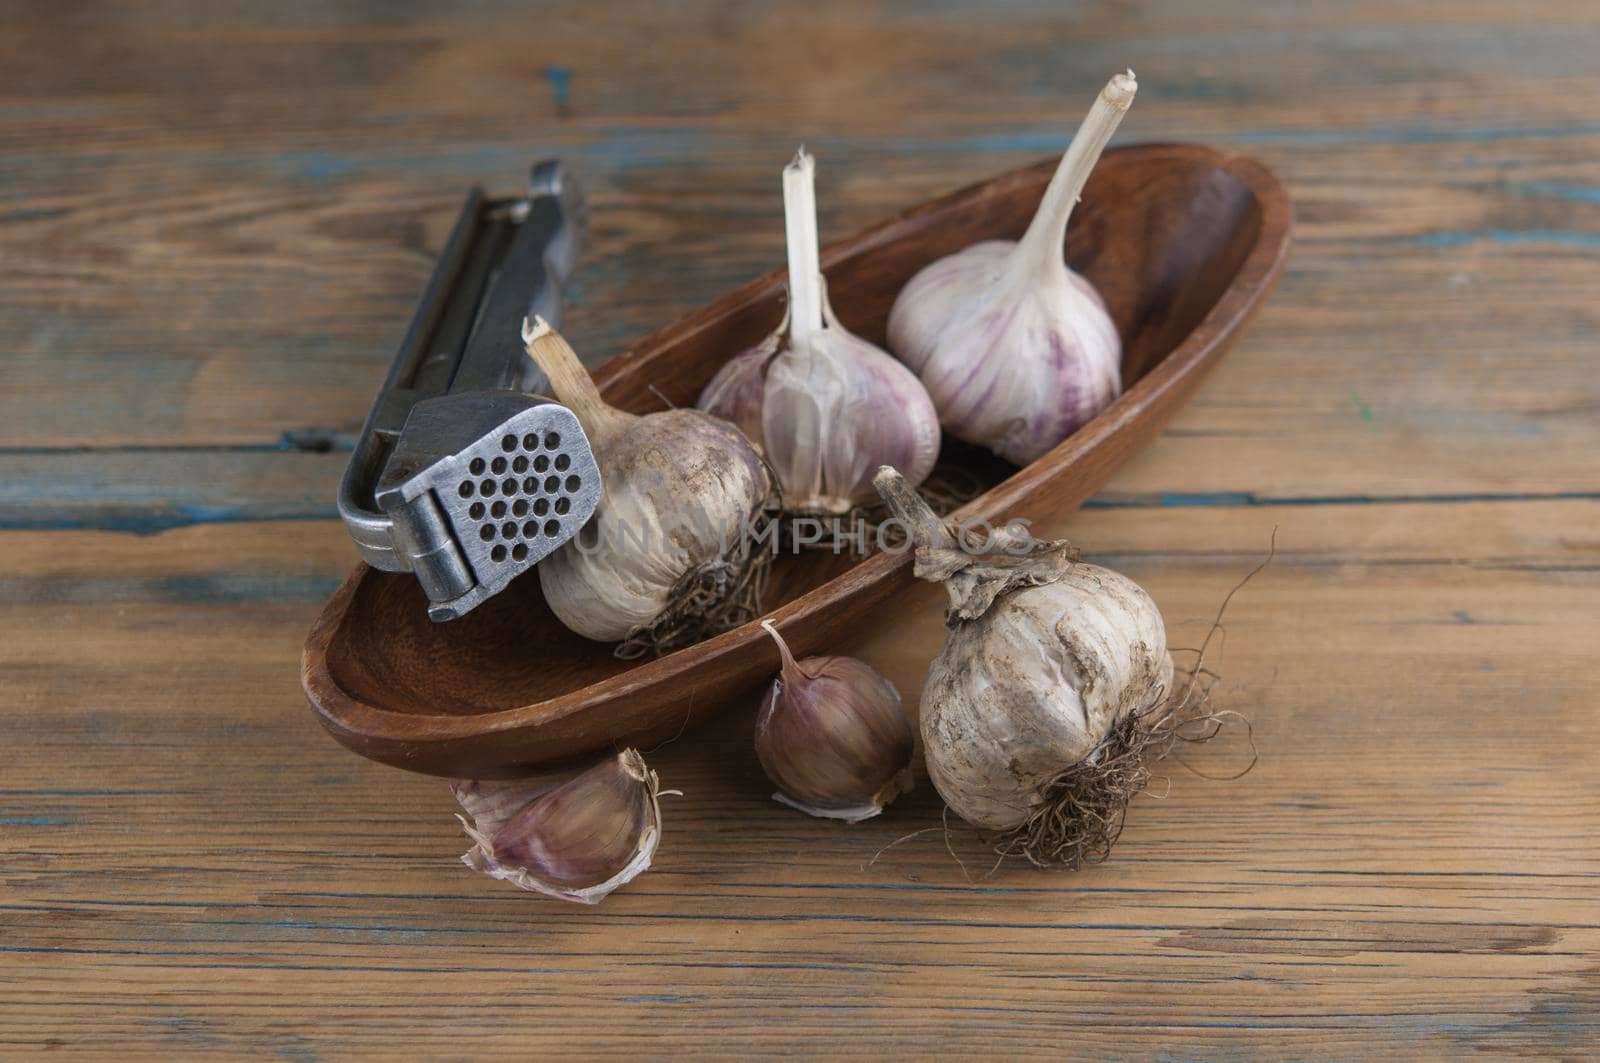 Organic garlic with metal press. Fresh garlic cloves and garlic bulb on a wooden table. Garlic for healthy eating. Concept of spices for healthy cooking. Top view